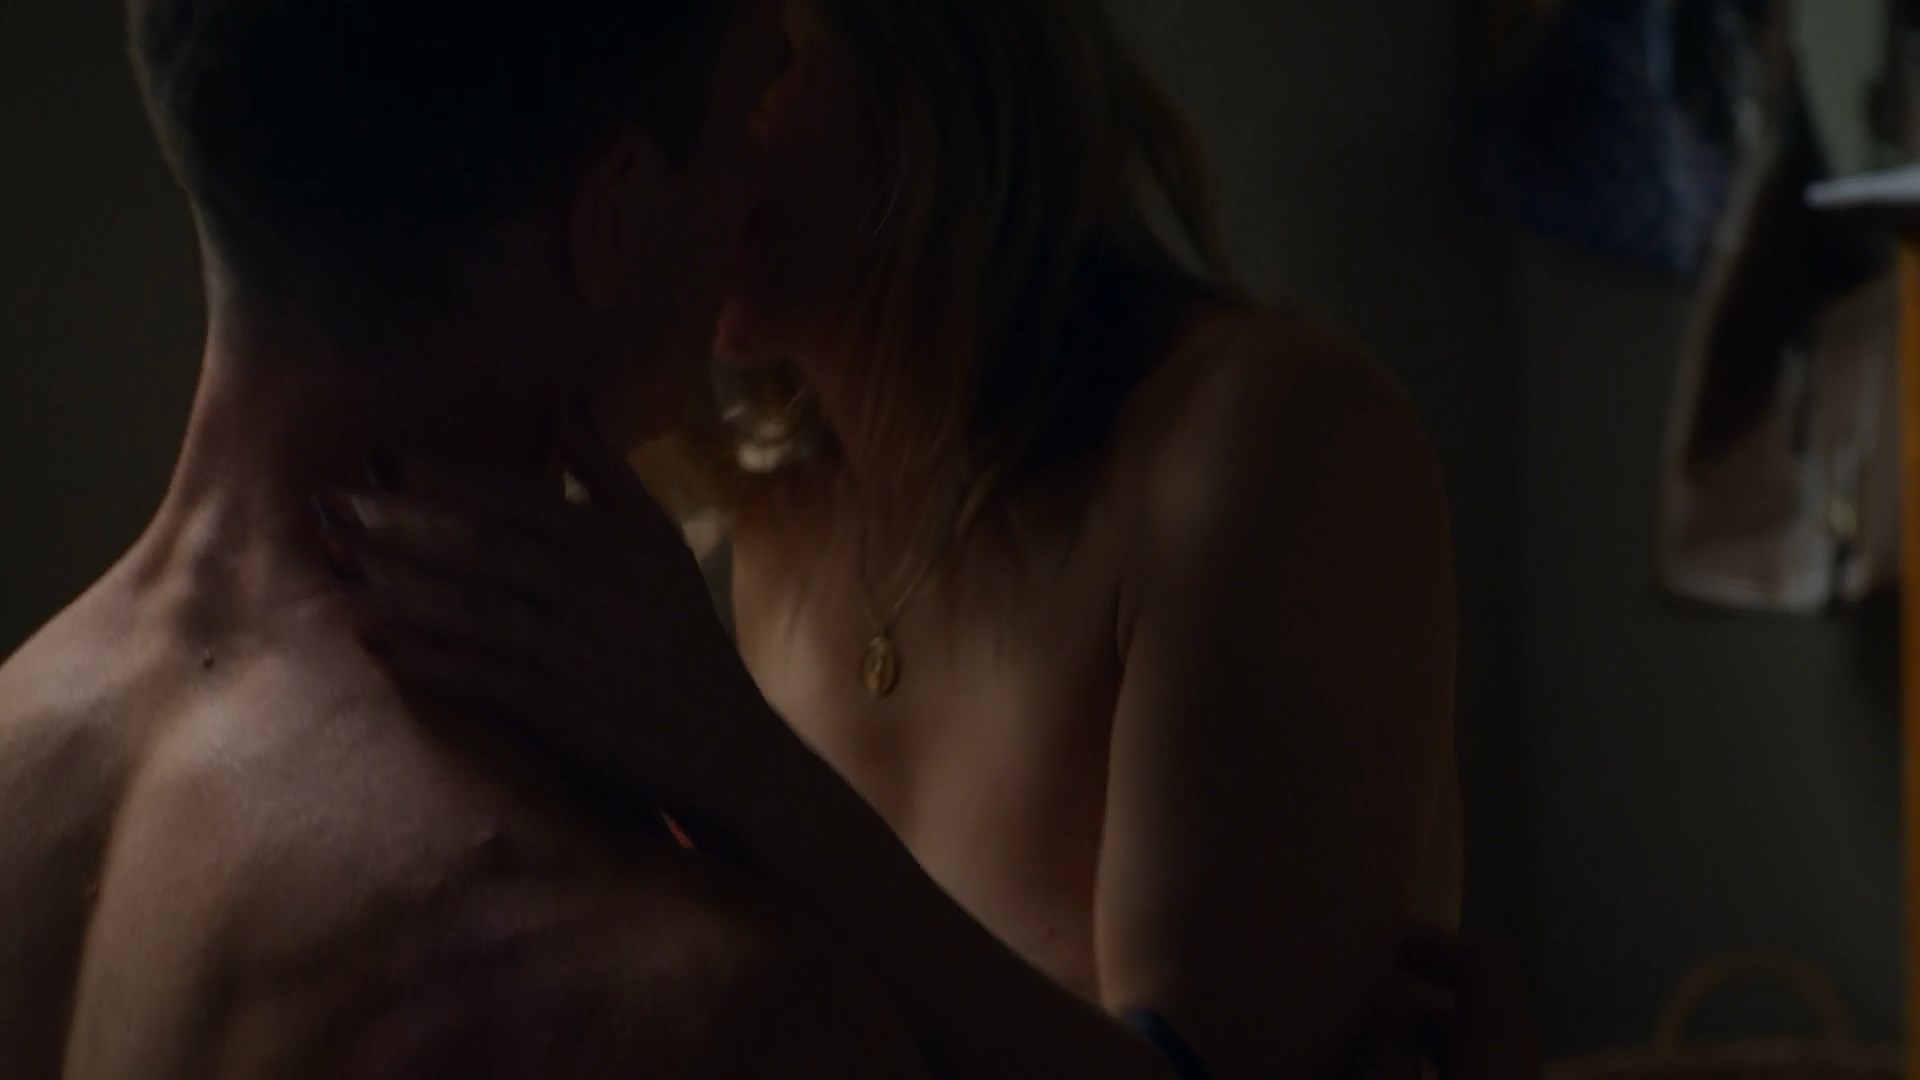 Kristen bell nude and sex scenes from veronica mars